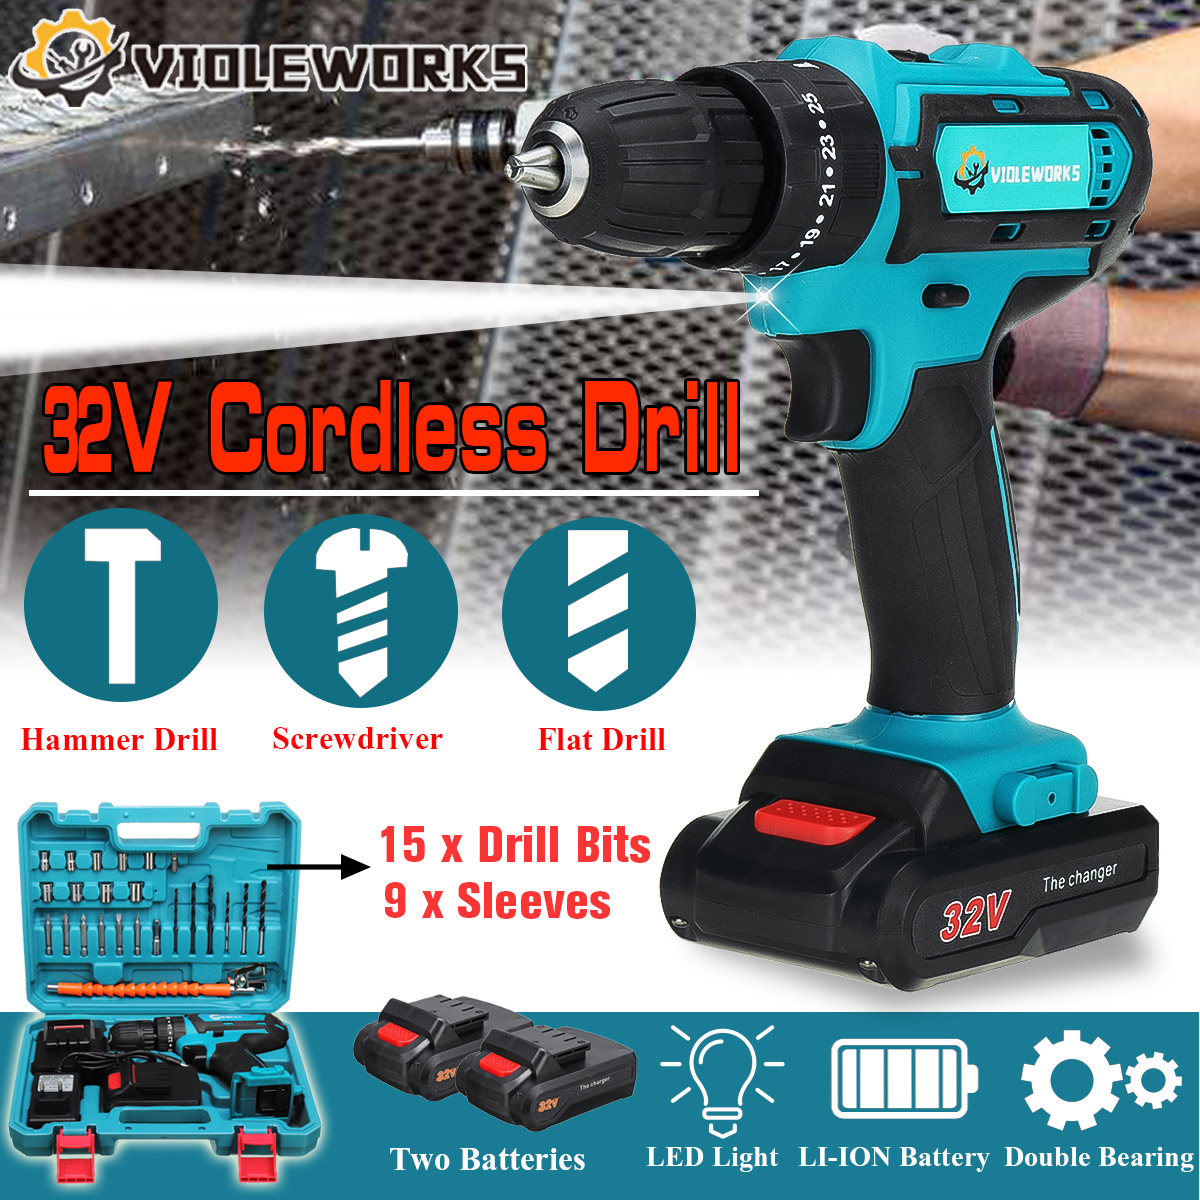 2-Speed-Power-Drills-6000mah-Cordless-Drill-3-IN-1-Electric-Screwdriver-Hammer-Drill-with-2pcs-Batte-1416071-1